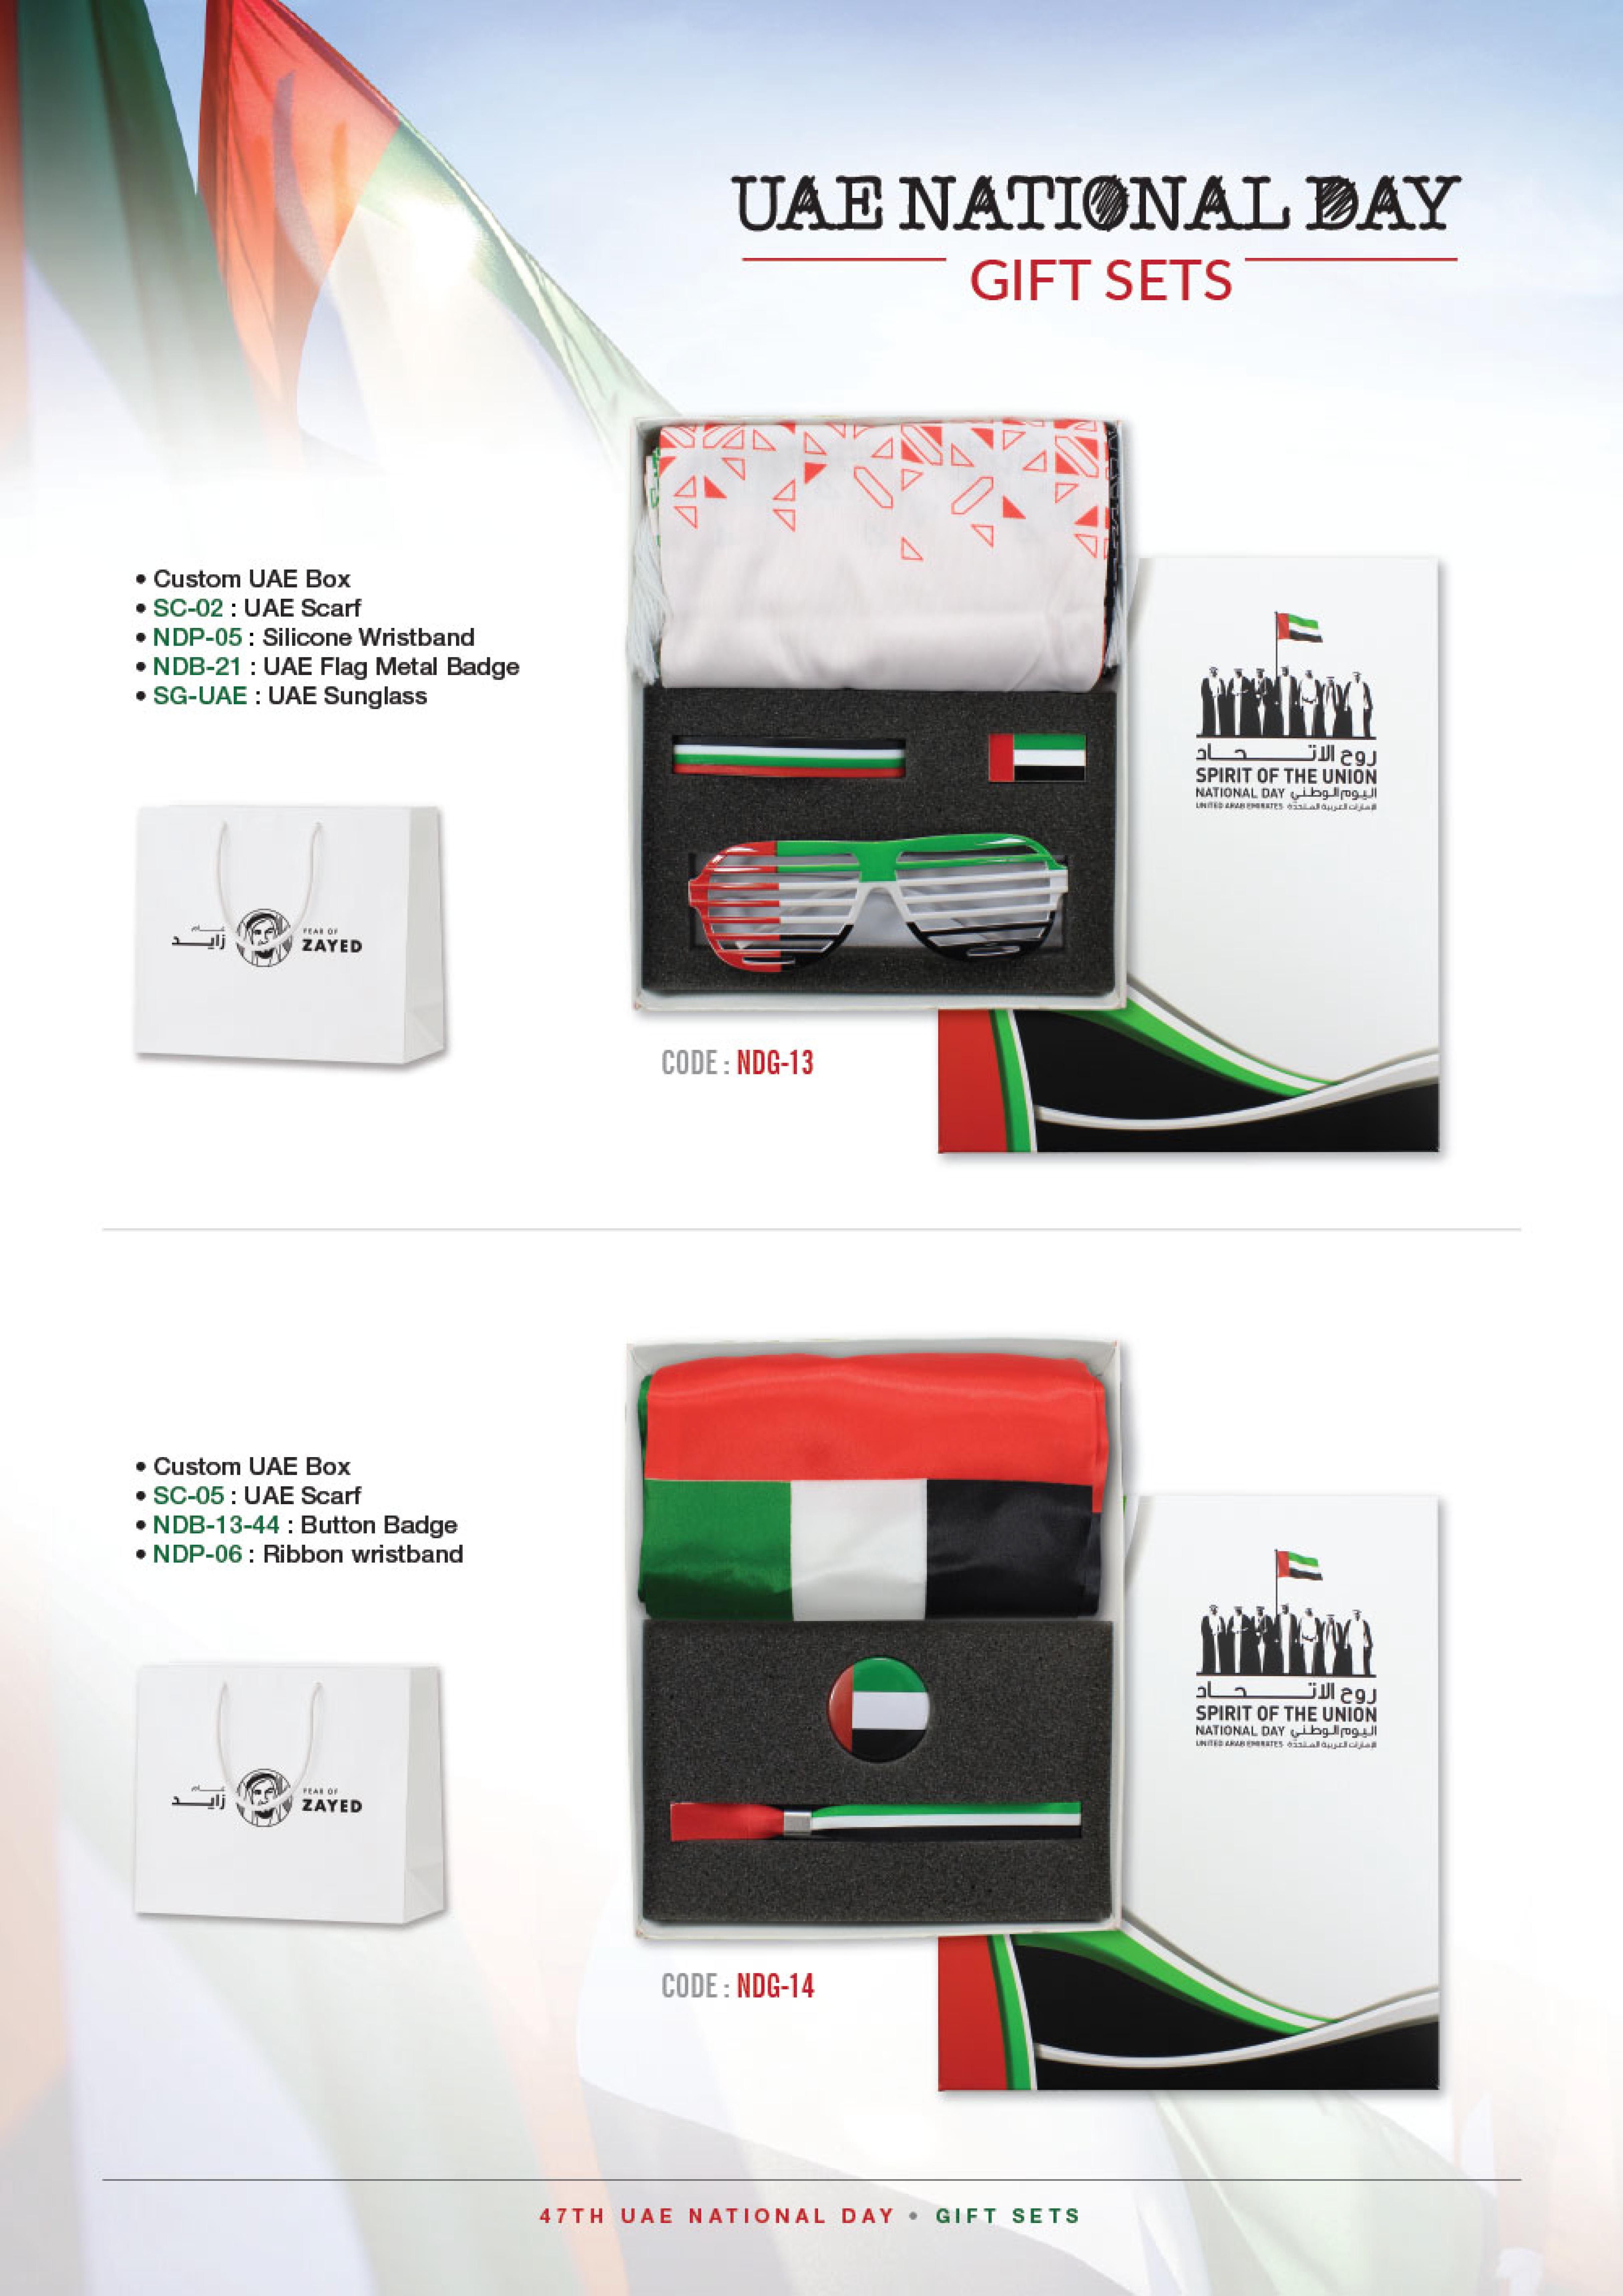 UAE NATIONAL DAY GIFTS ITEMS AND CELEBRATION lCatalogue